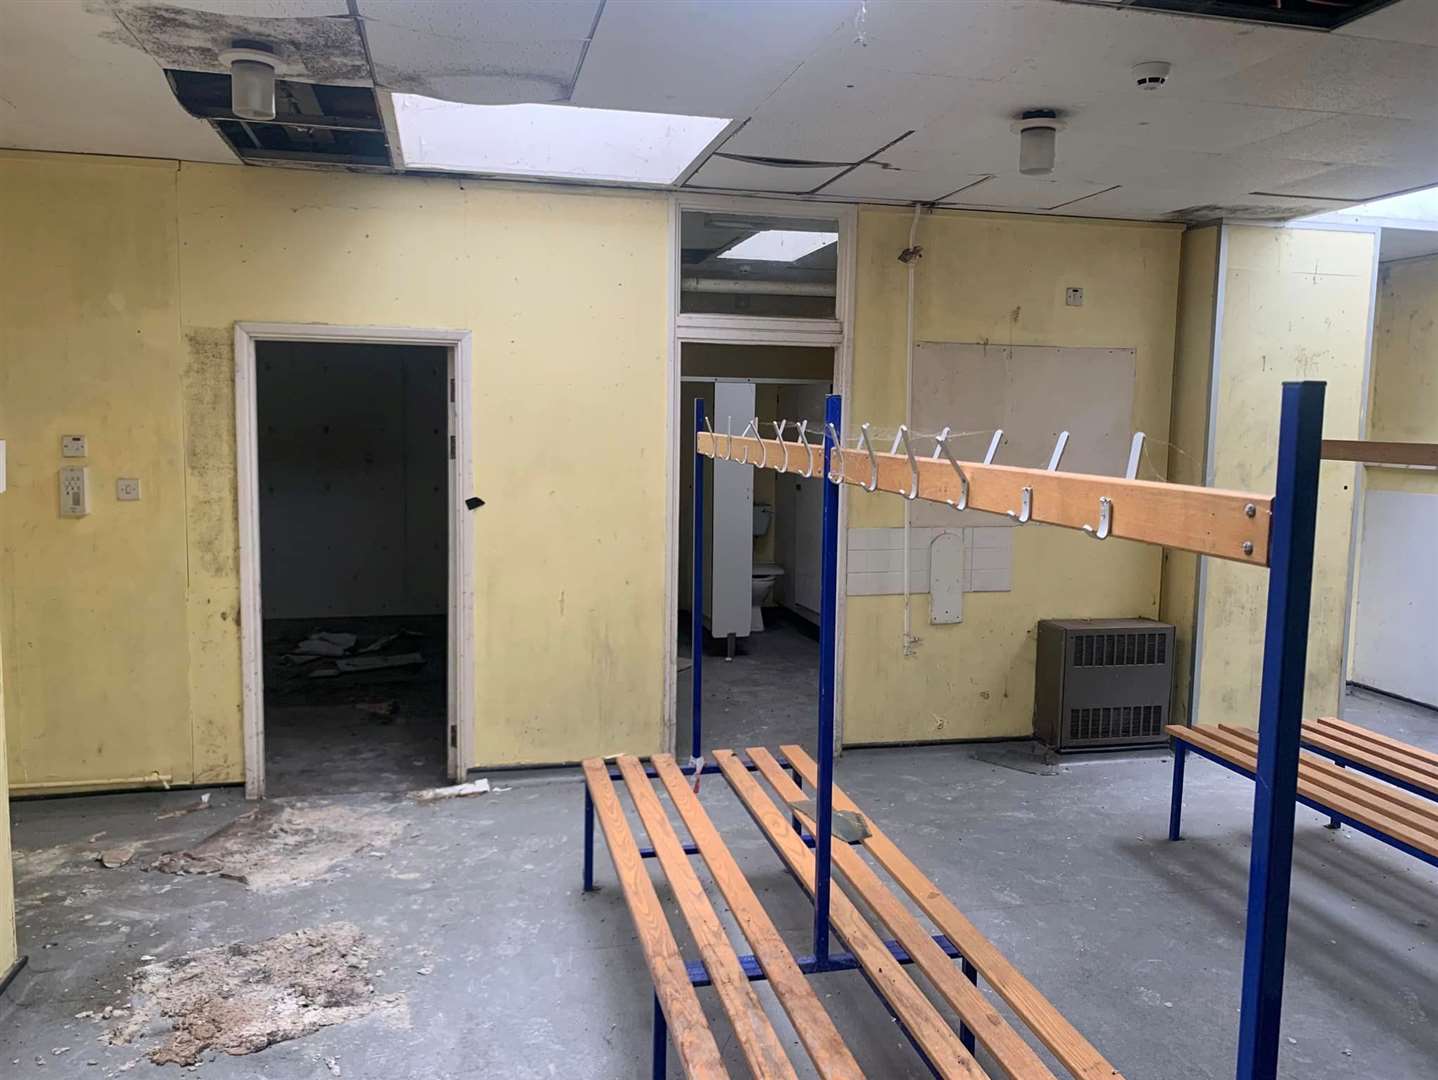 PE changing rooms at the former Oasis Academy Hextable